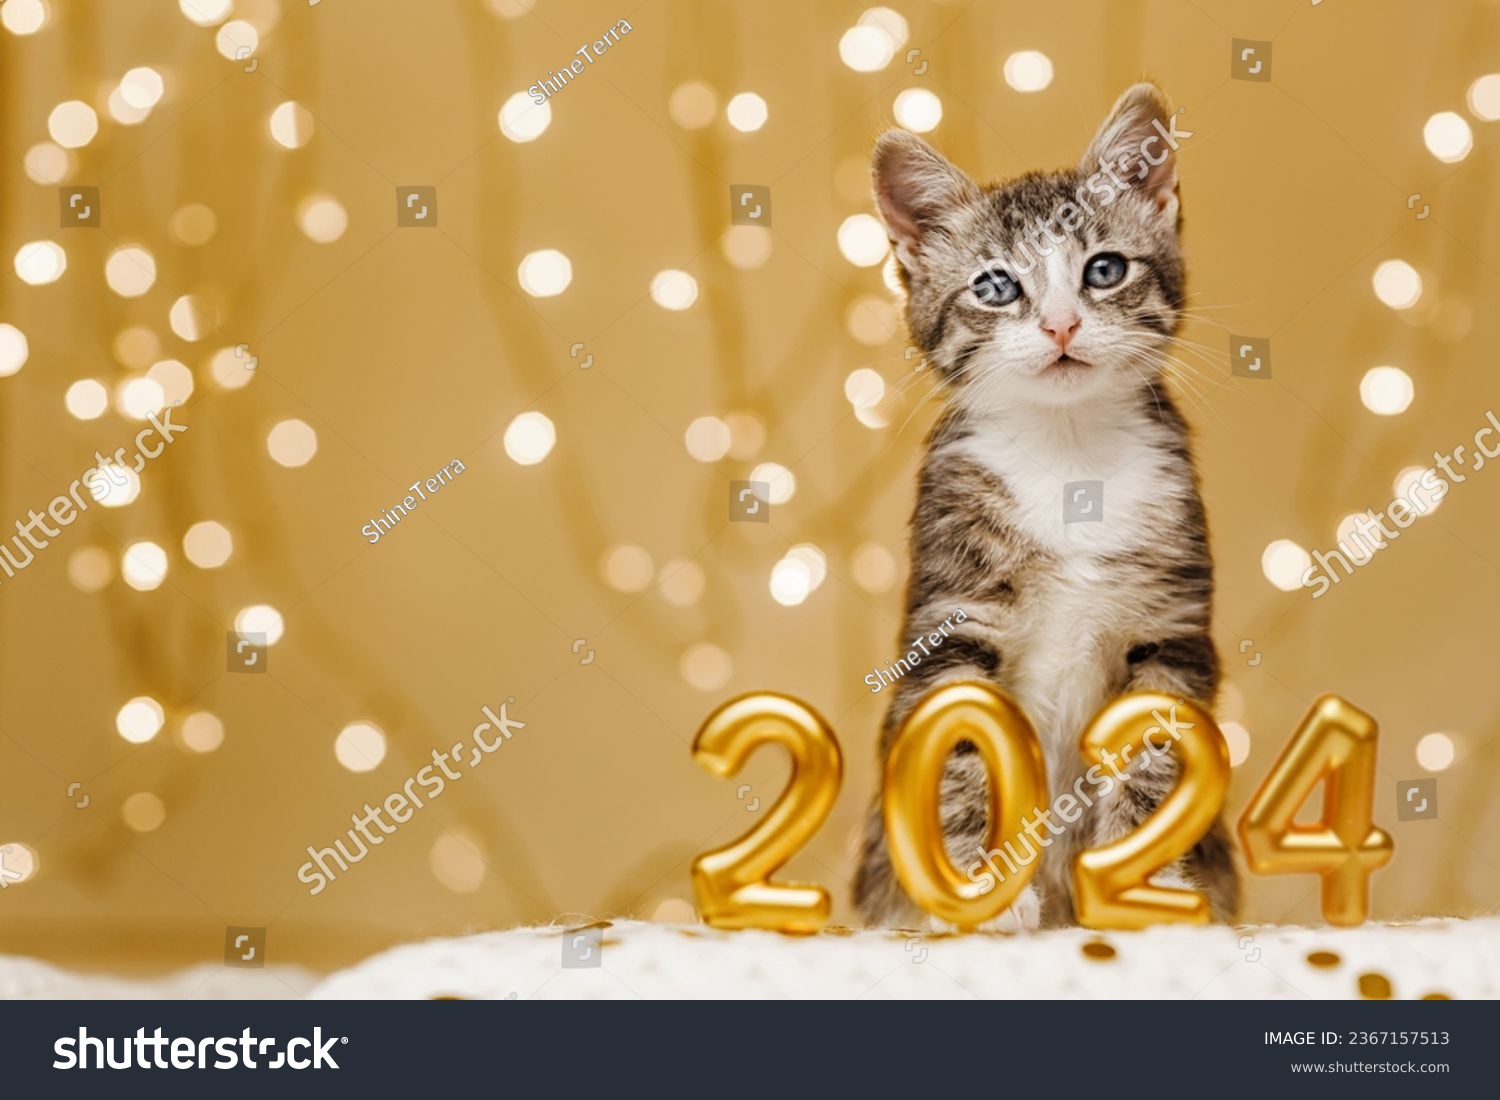 The kitten stands peacefully behind the inscription of the numbers of the upcoming new year 2024 on a light background of lights from garlands. #2367157513